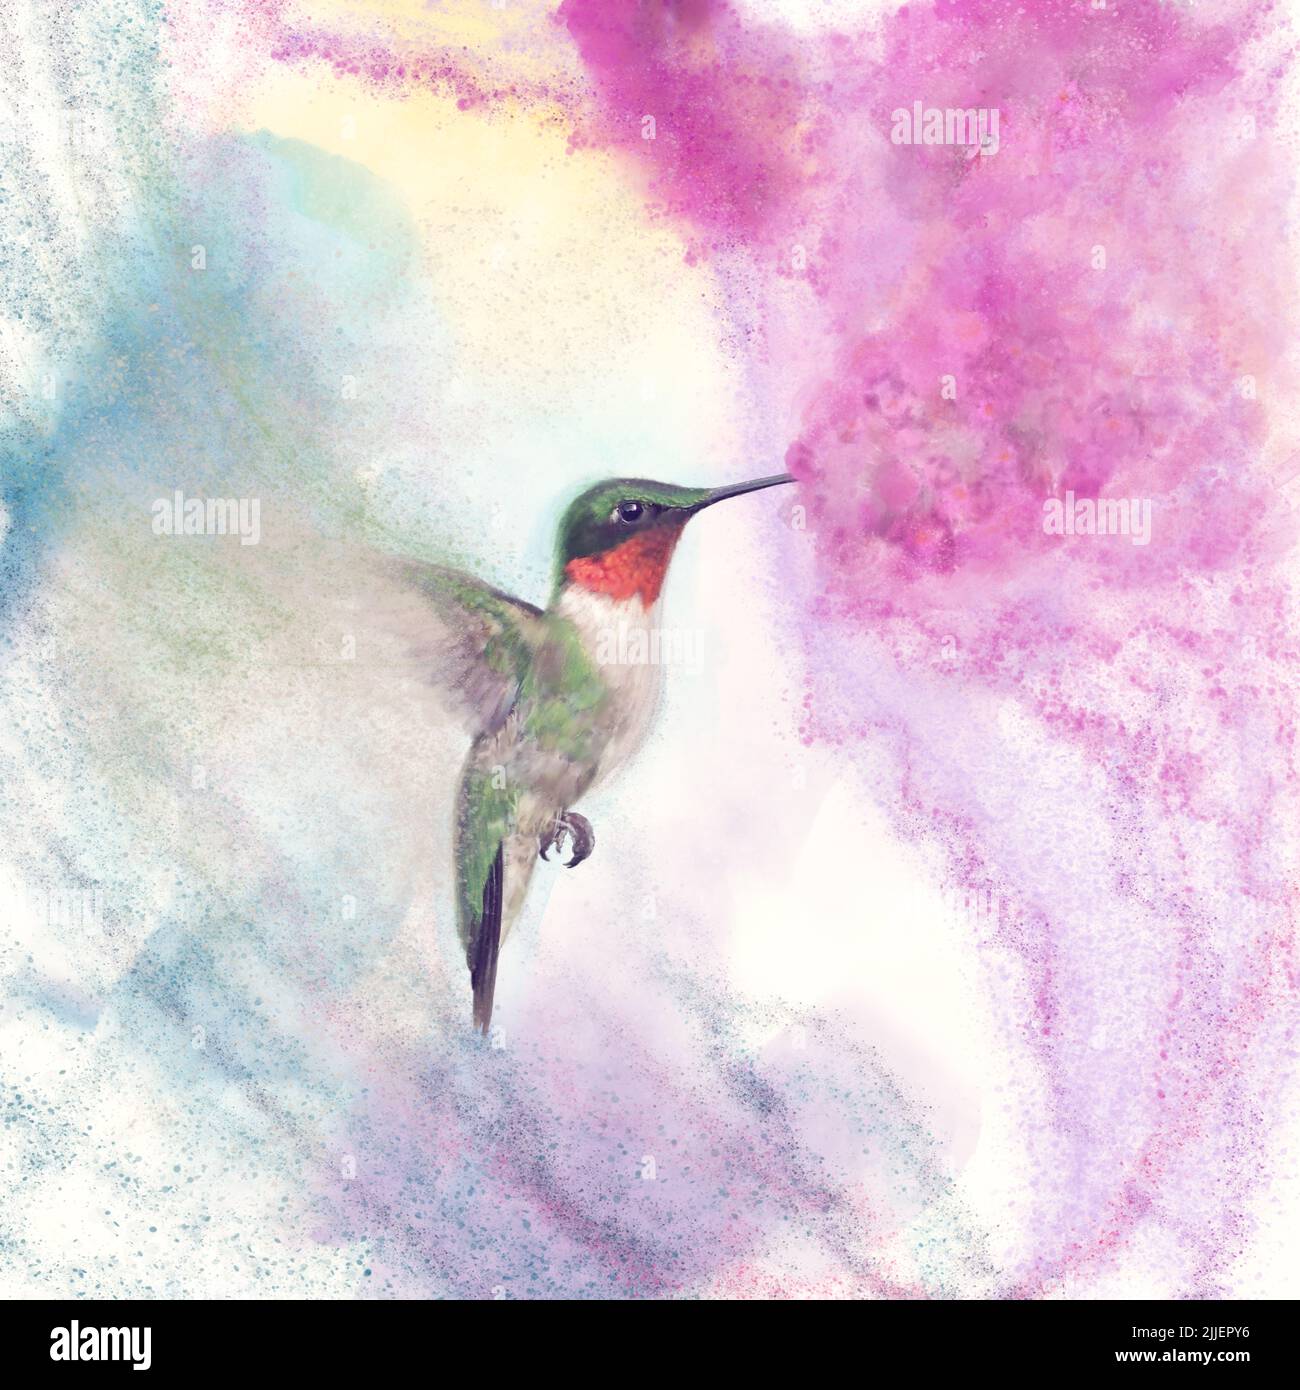 Digital Watercolor Painting of Hummingbird and flowers Stock Photo